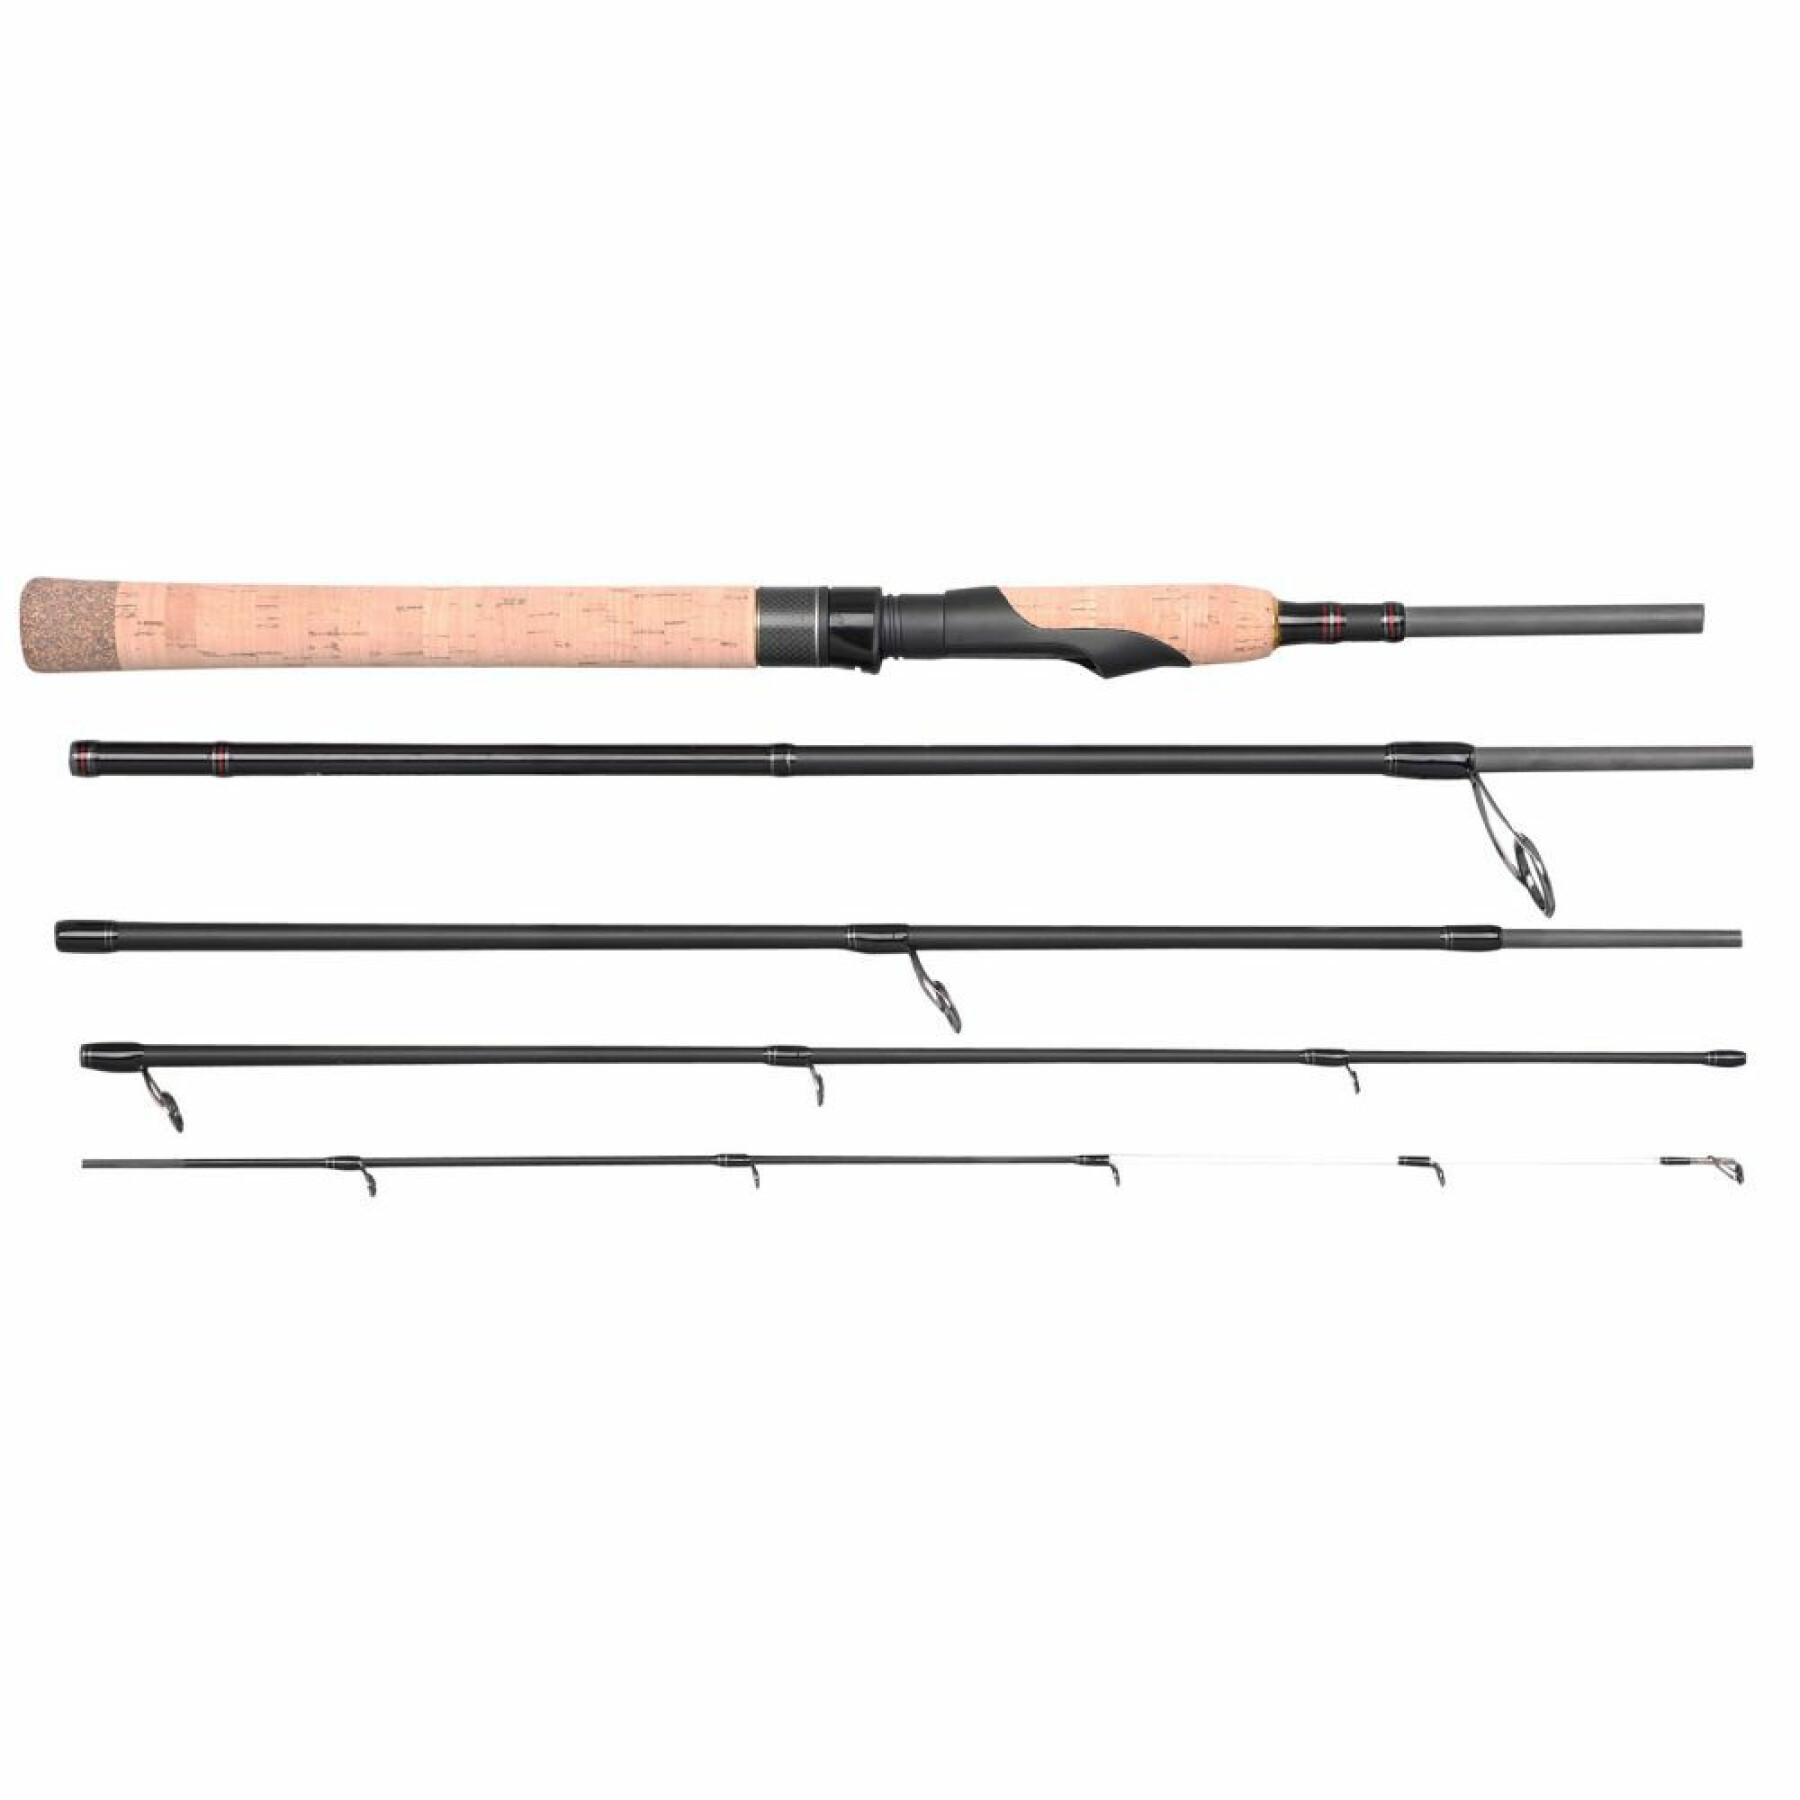 Spinning rod Spro Mobile Stick 10-30g